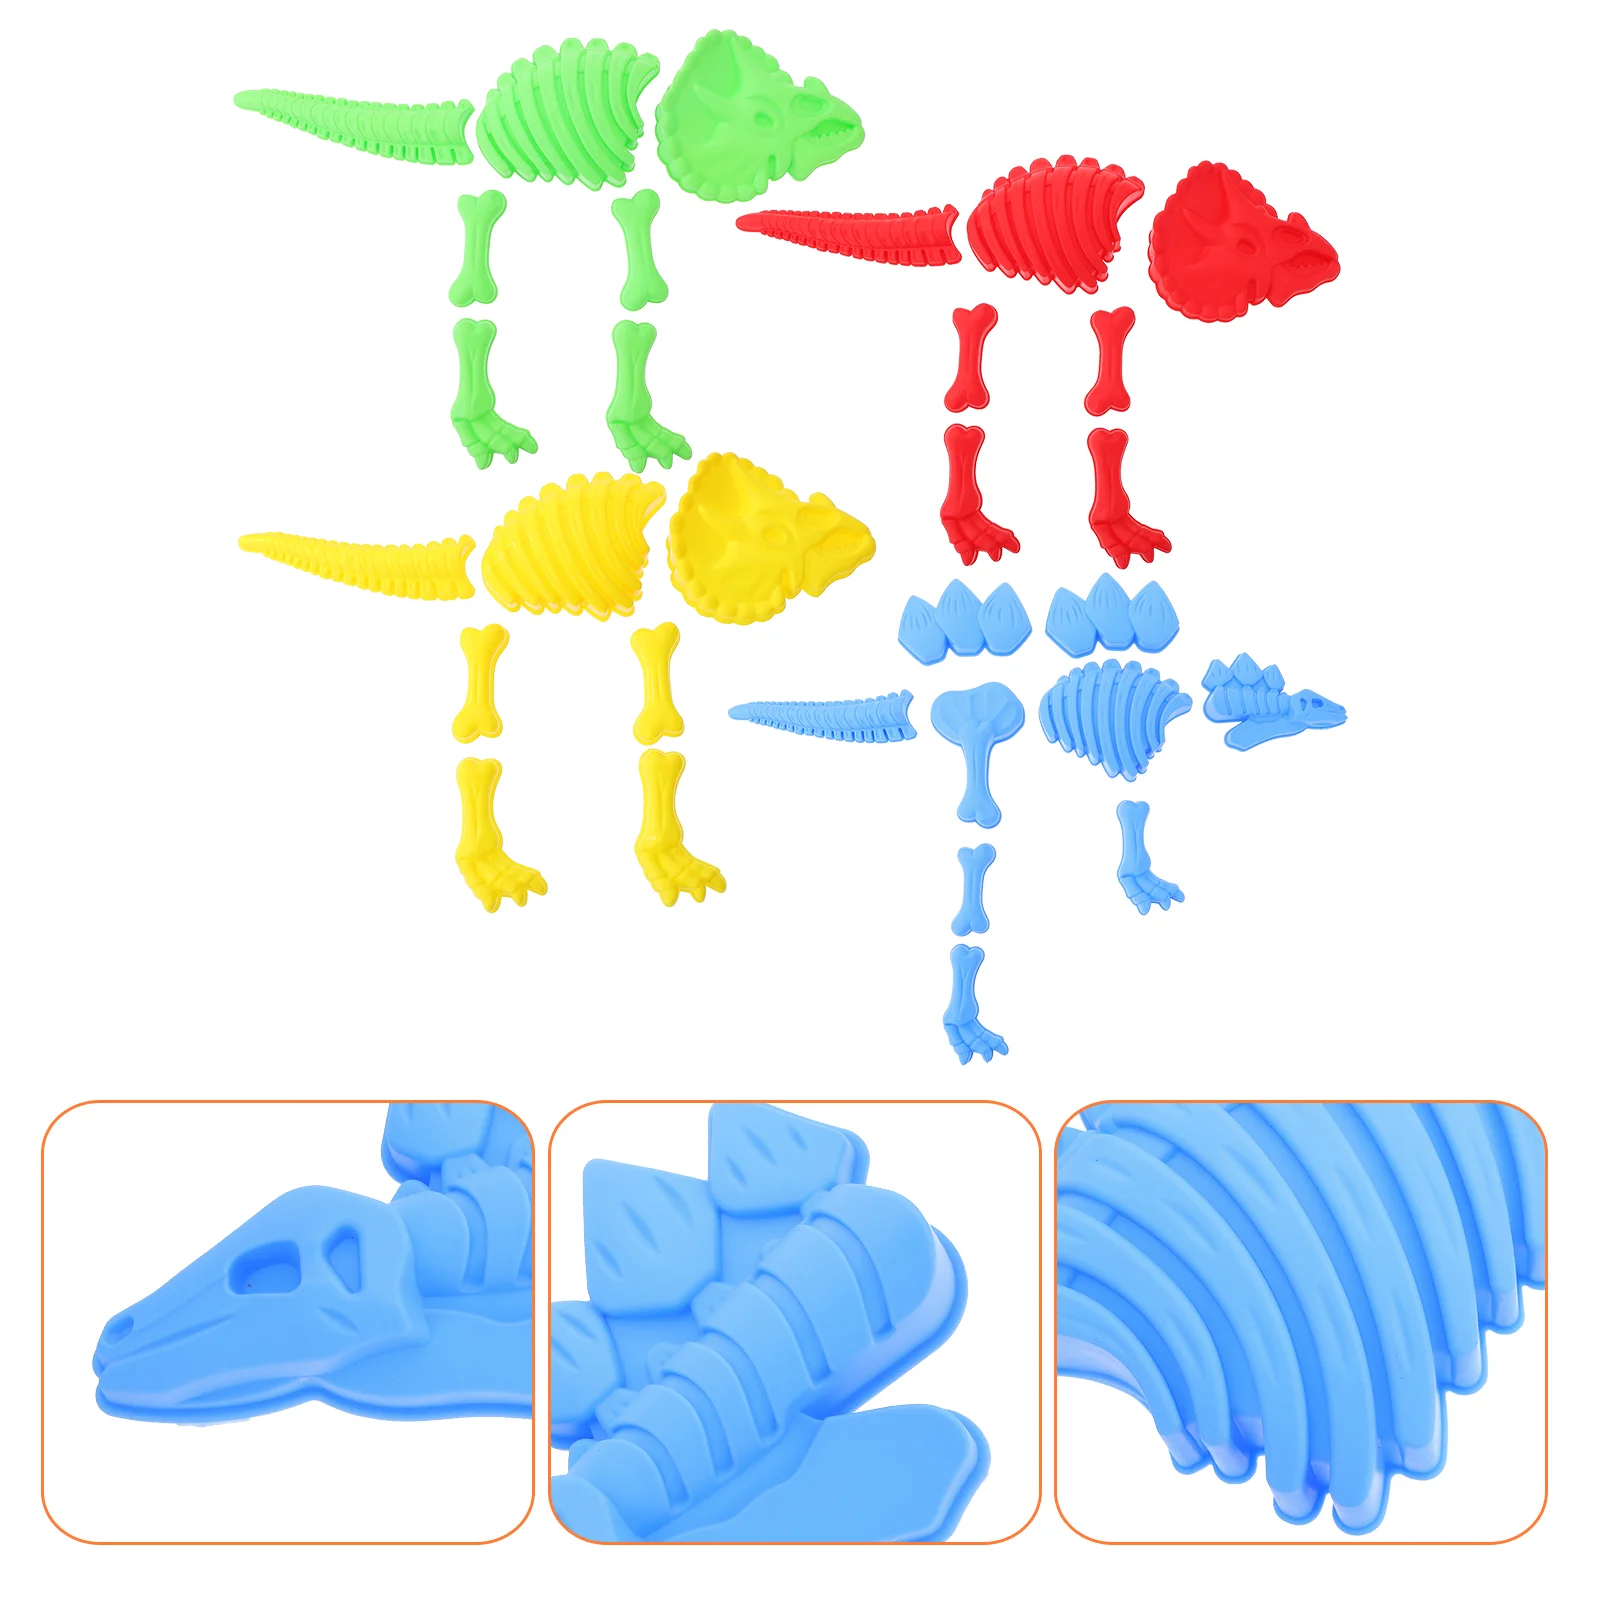 

4 Sets Dinosaur Mold Sand Molds for Kids Toy Puzzle Plastic Beach Educational Plaything Child Children’s